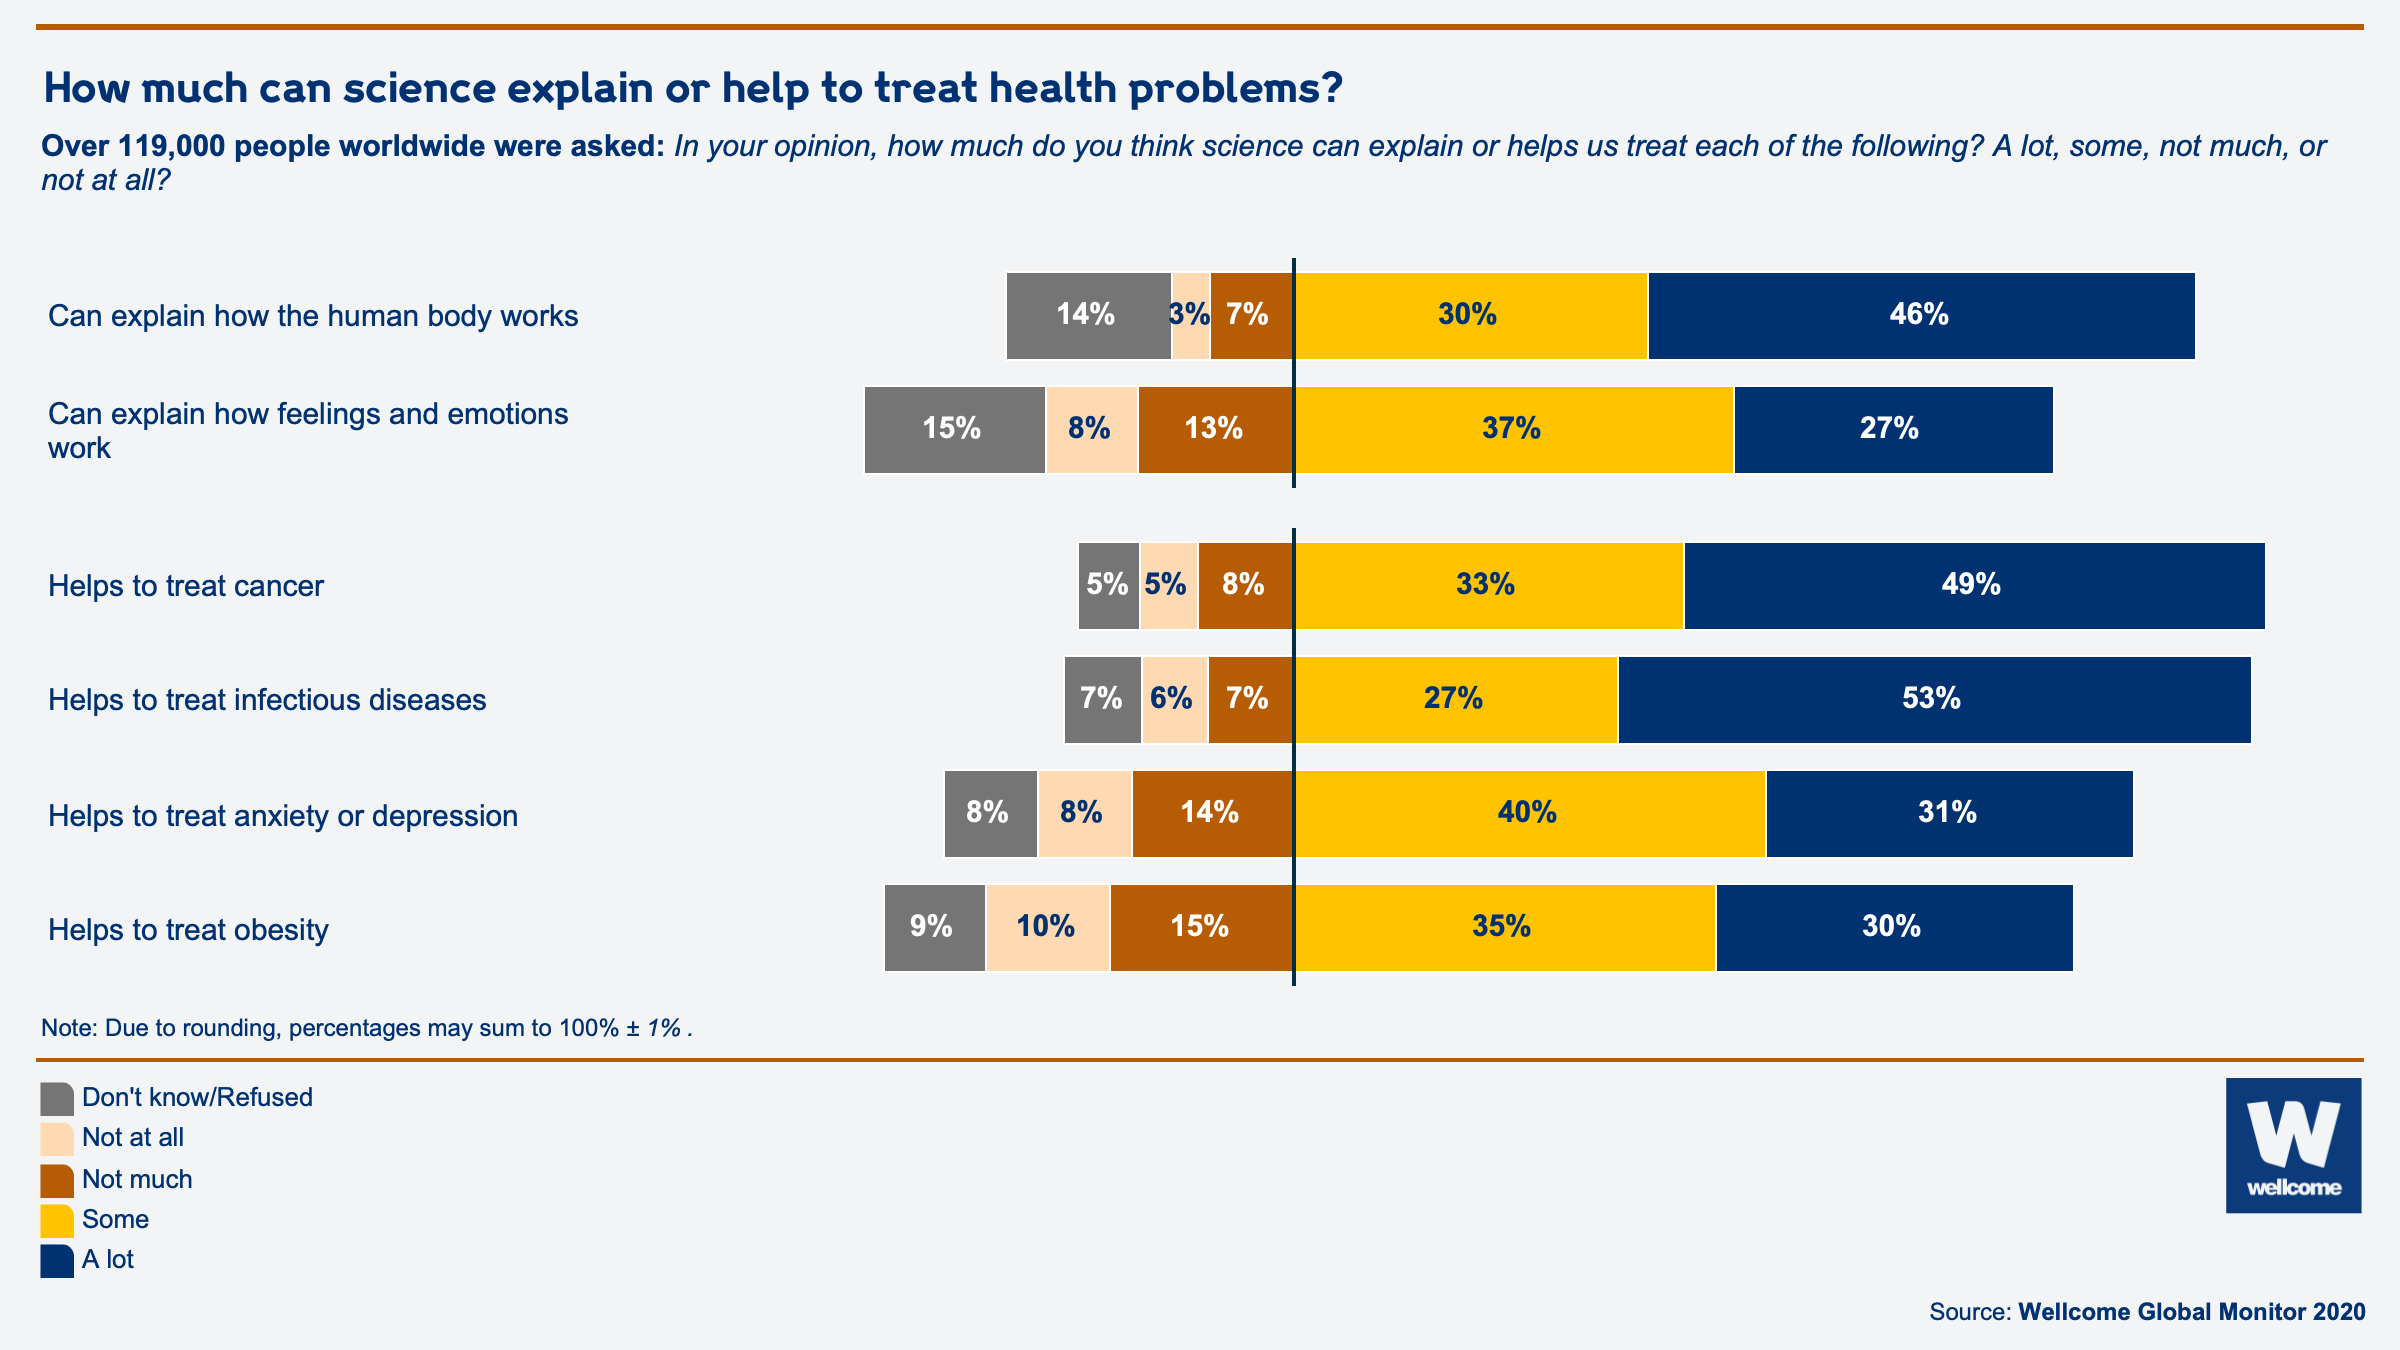 bar chart to show how much people think science can explain or help to treat health problems